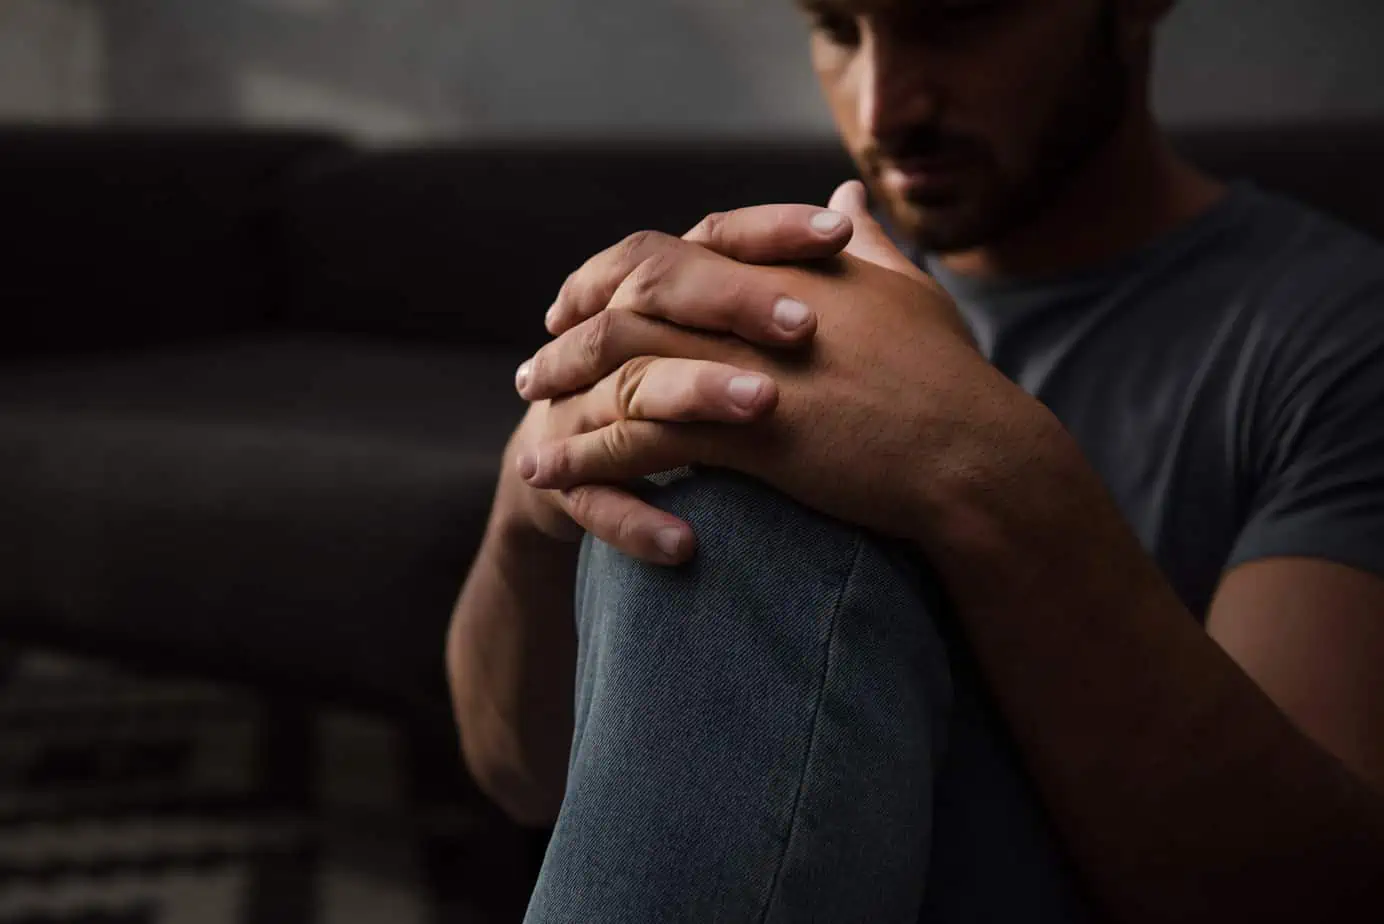 A man sitting on a couch holding his hands together